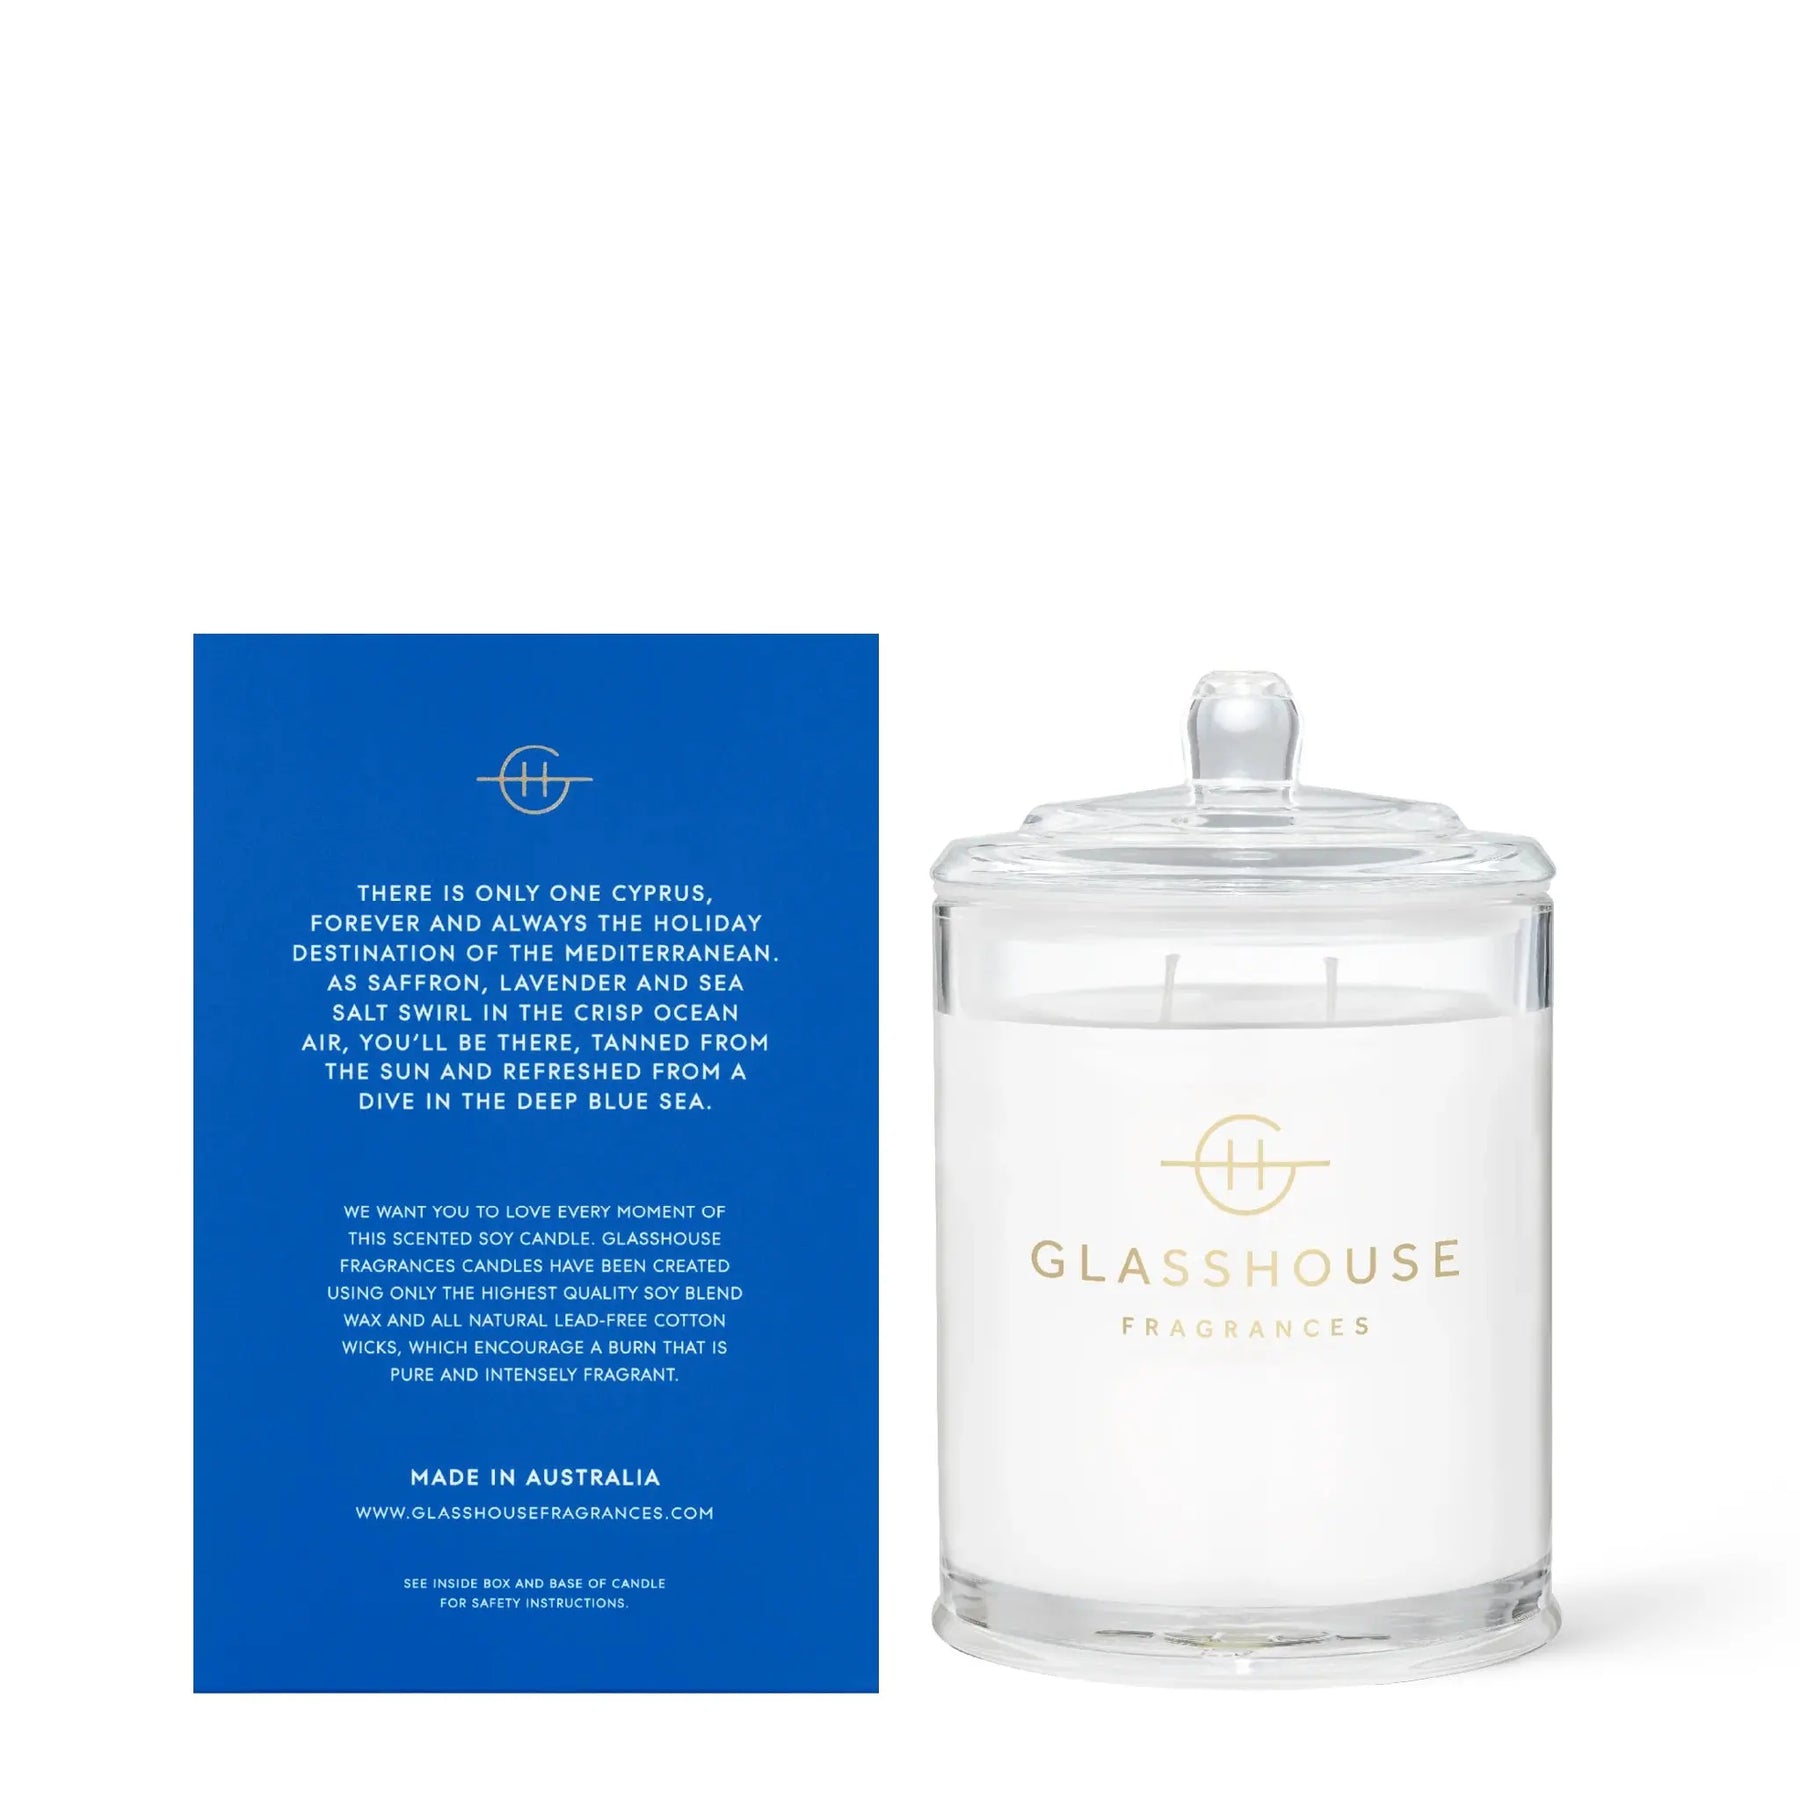 Glasshouse Fragrances Diving in Cyprus Soy Candle There is only one cyprus, forever and always the holiday destination of the mediterranean. As saffron, lavender and sea salt swirl in the crisp ocean air, you'll be there, tanned from the sun and refreshed from the sun and refreshed from a dive in the deep blue sea. We want you to love every moment of this scented soy candle. Glasshouse fragrances candles have been created using only the highest quality soy blend wax and all natural led-free cotton wicks, wh